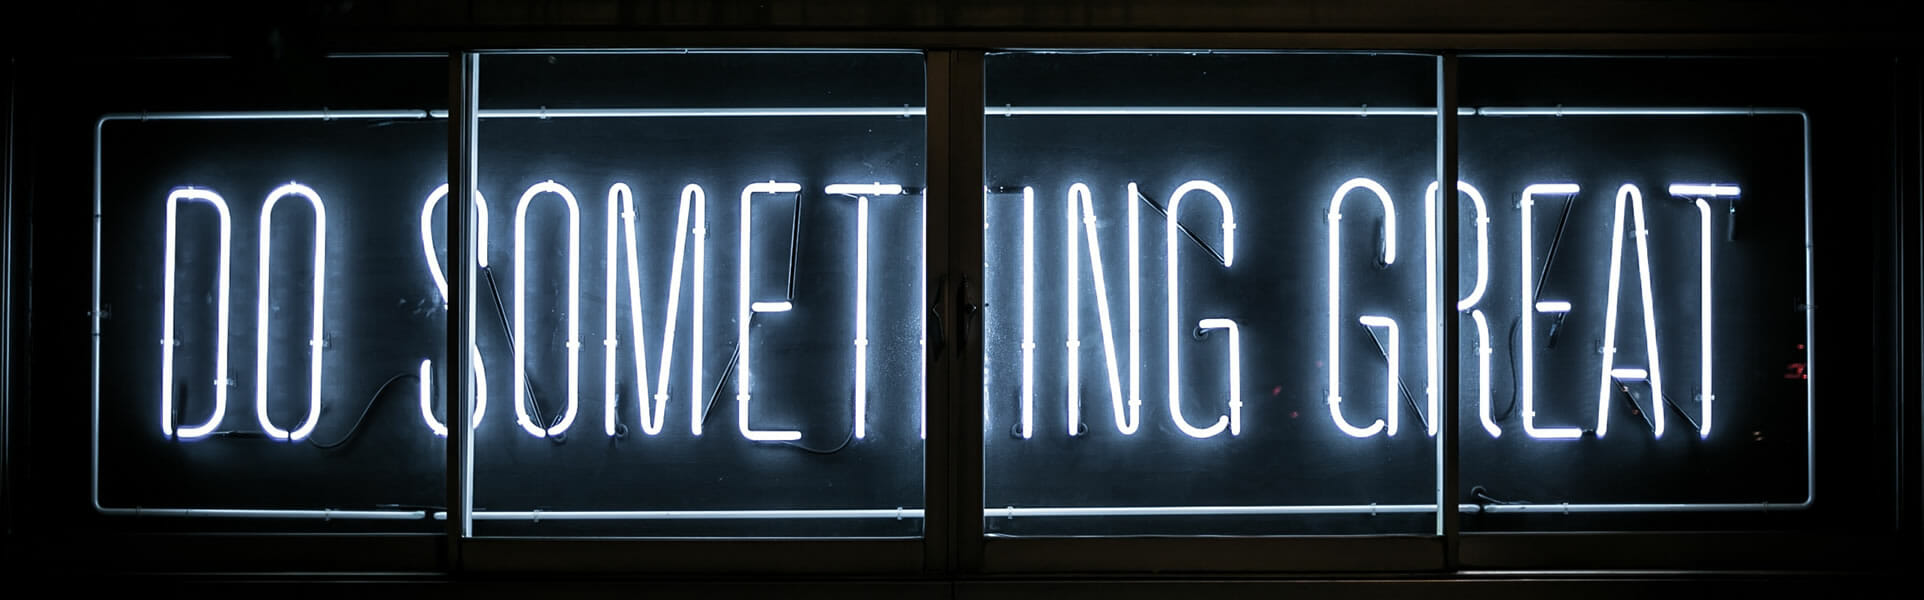 How to have a great sales conference - Do something great neon sign - Photo by Clark Tibbs on Unsplash